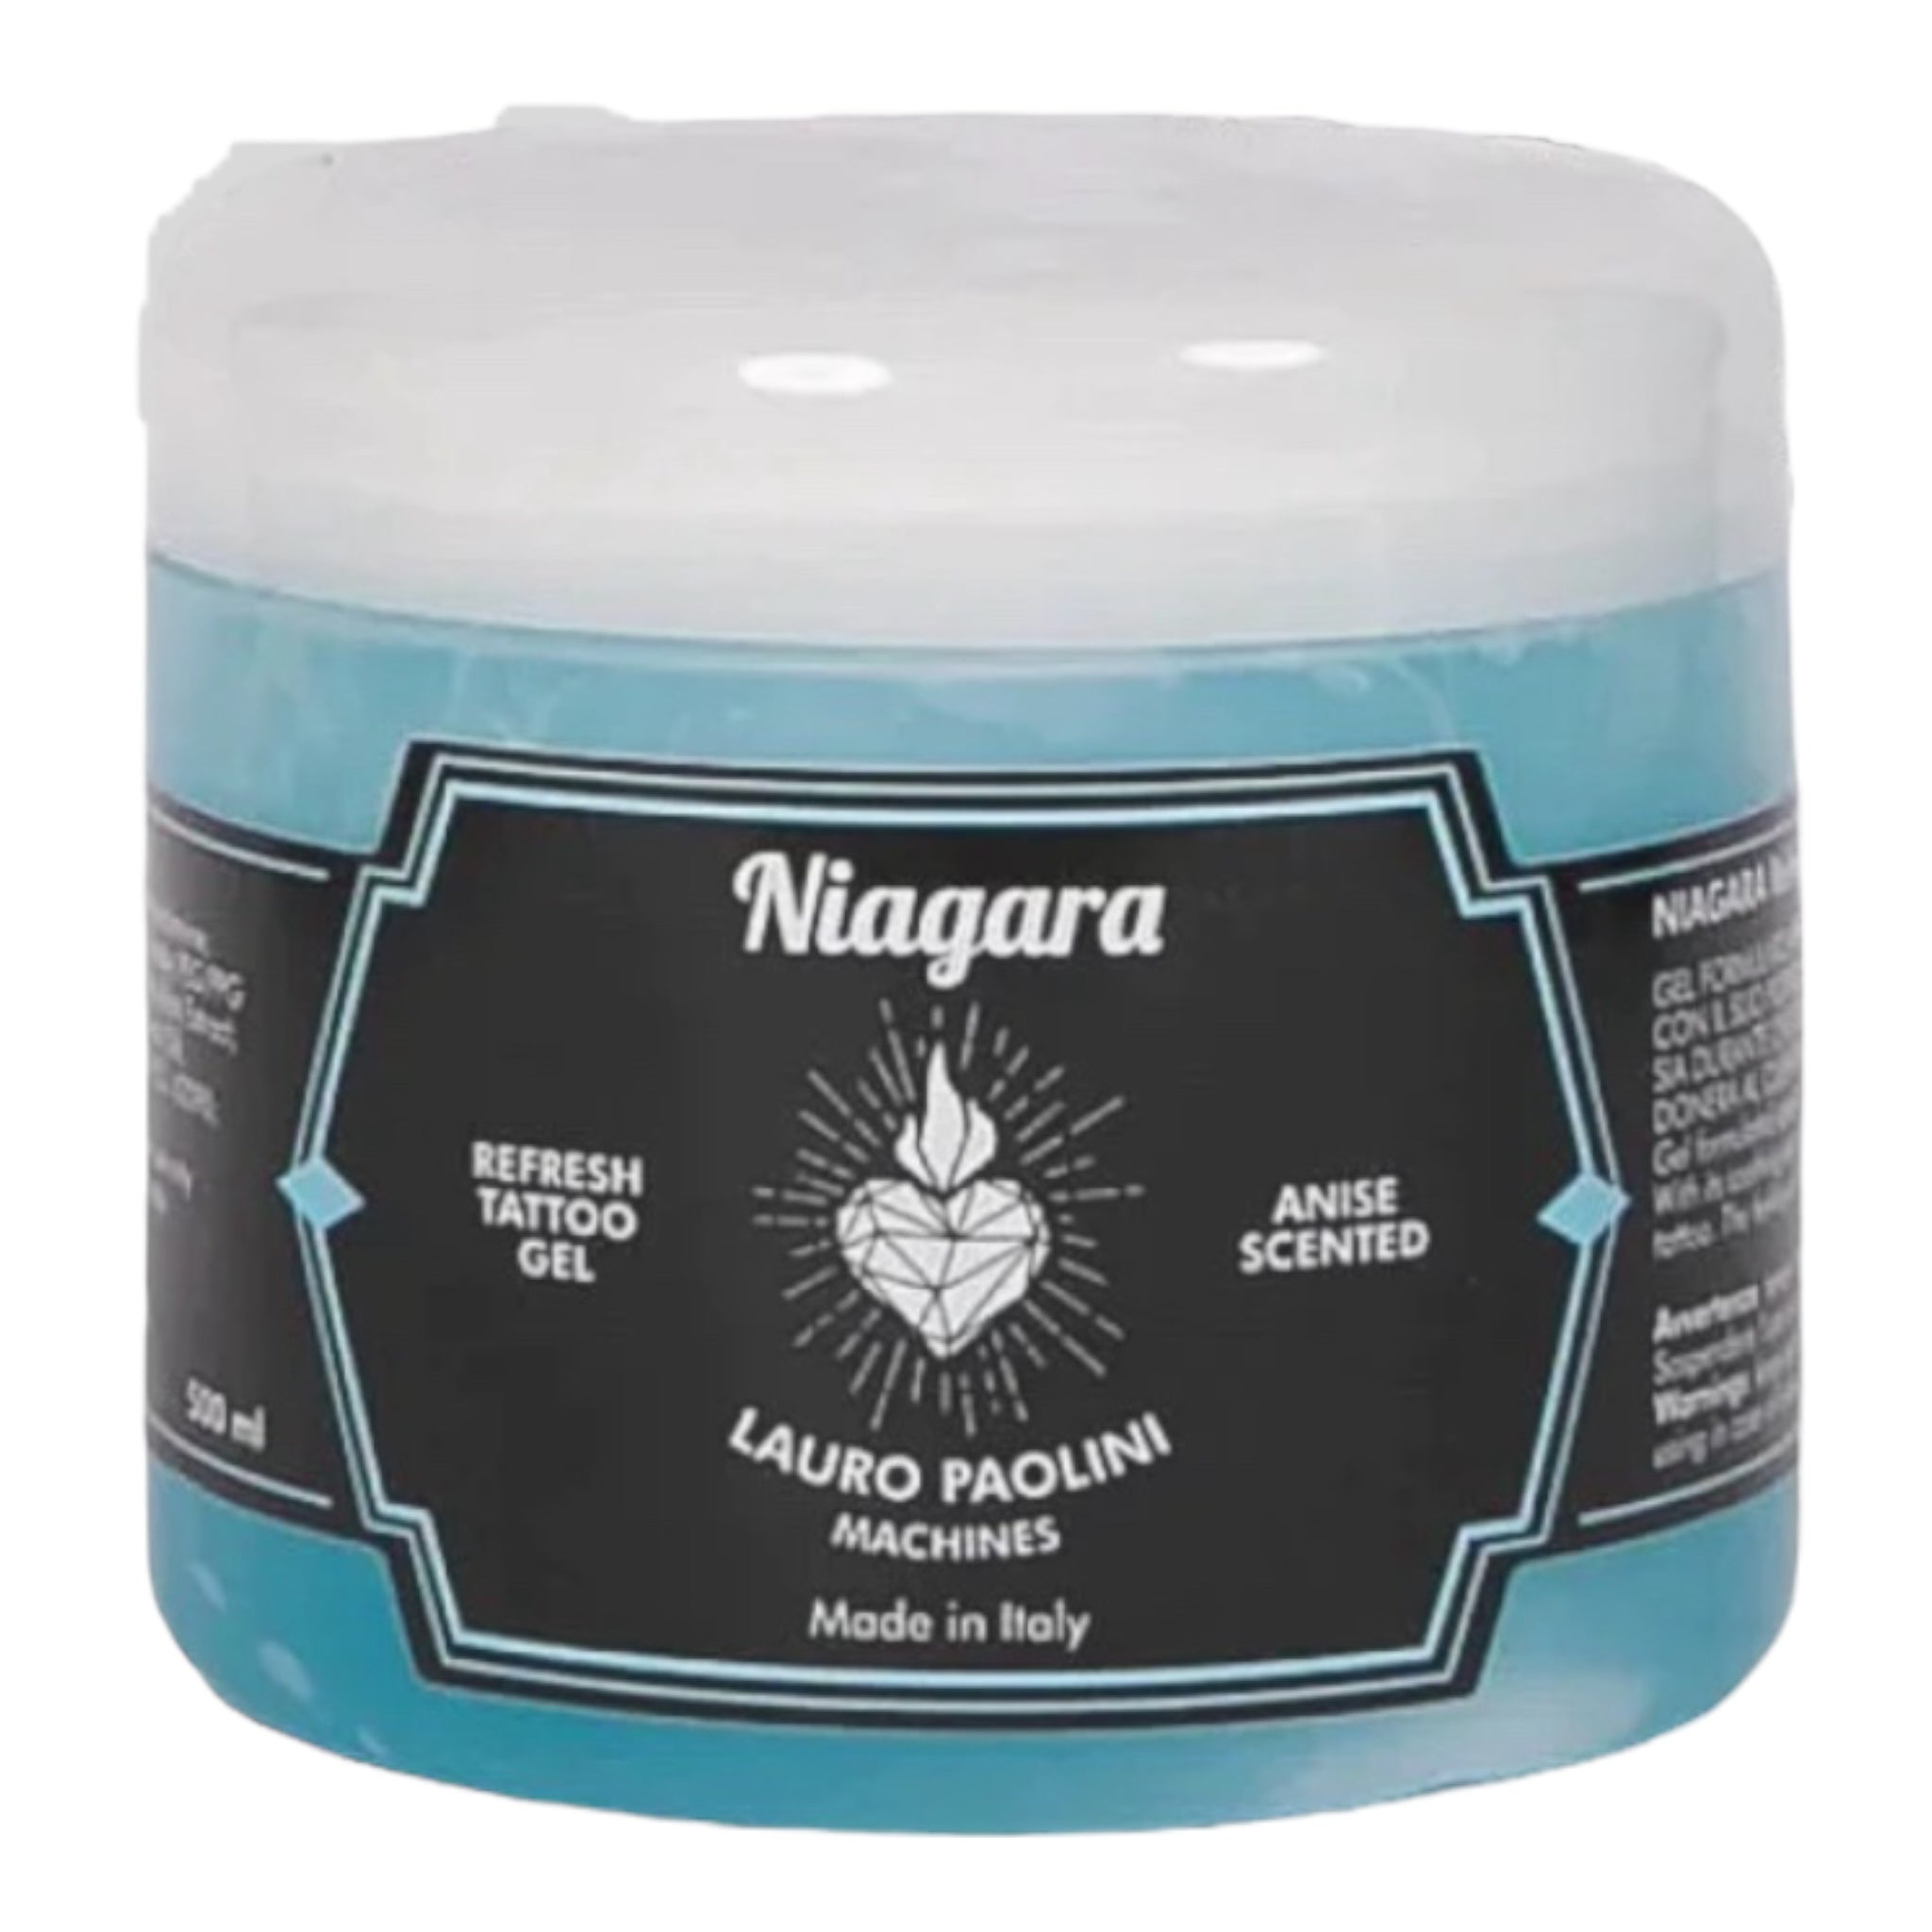 Niagara By Lauro Paolini 500 gr - Onguent